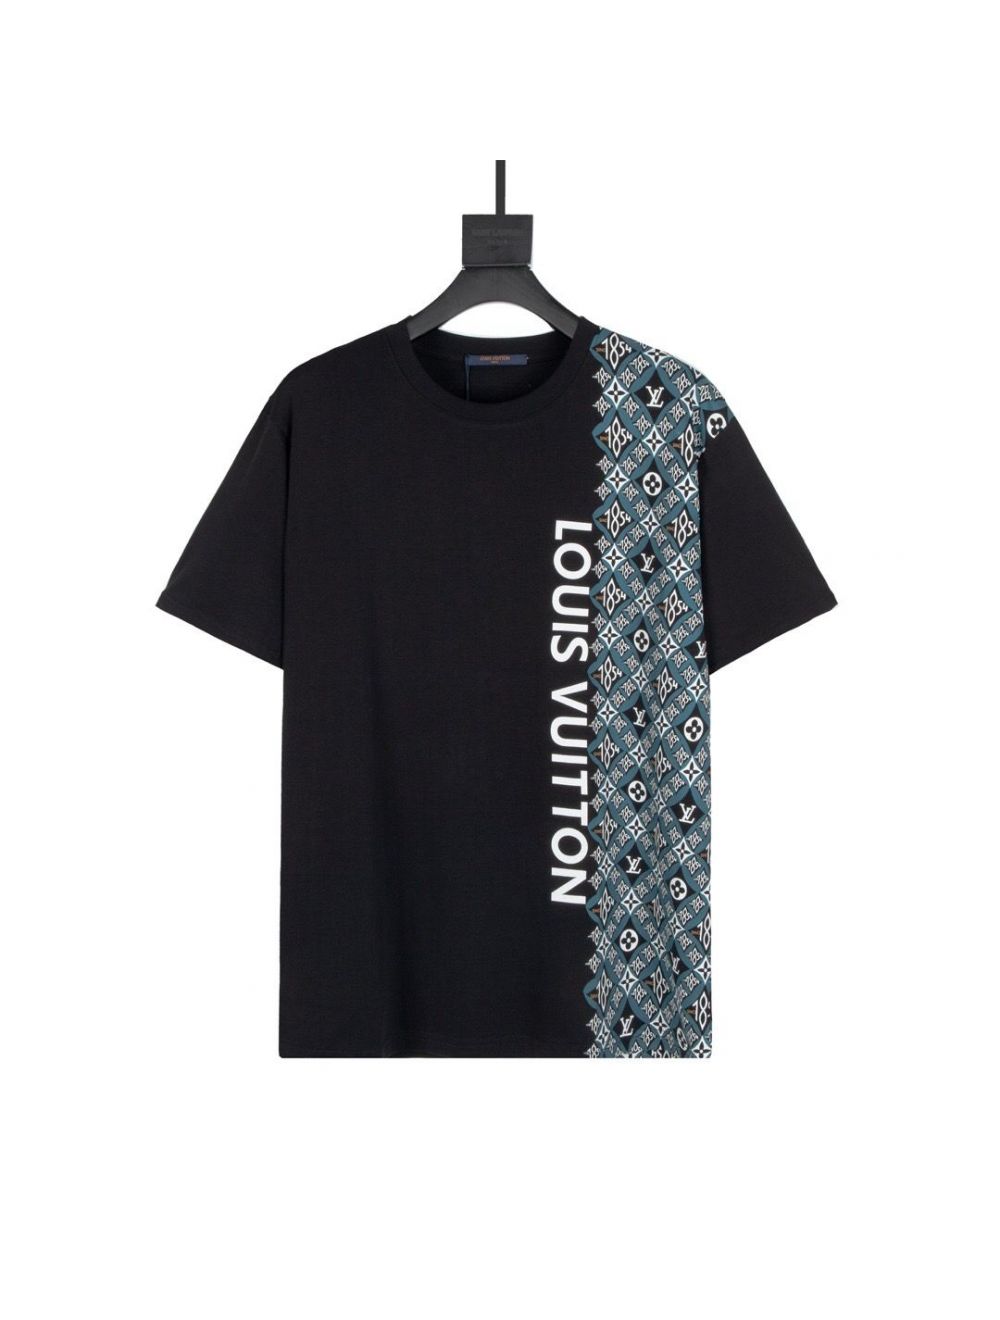 Louis Vuitton T-Shirts in Uganda for sale ▷ Prices on